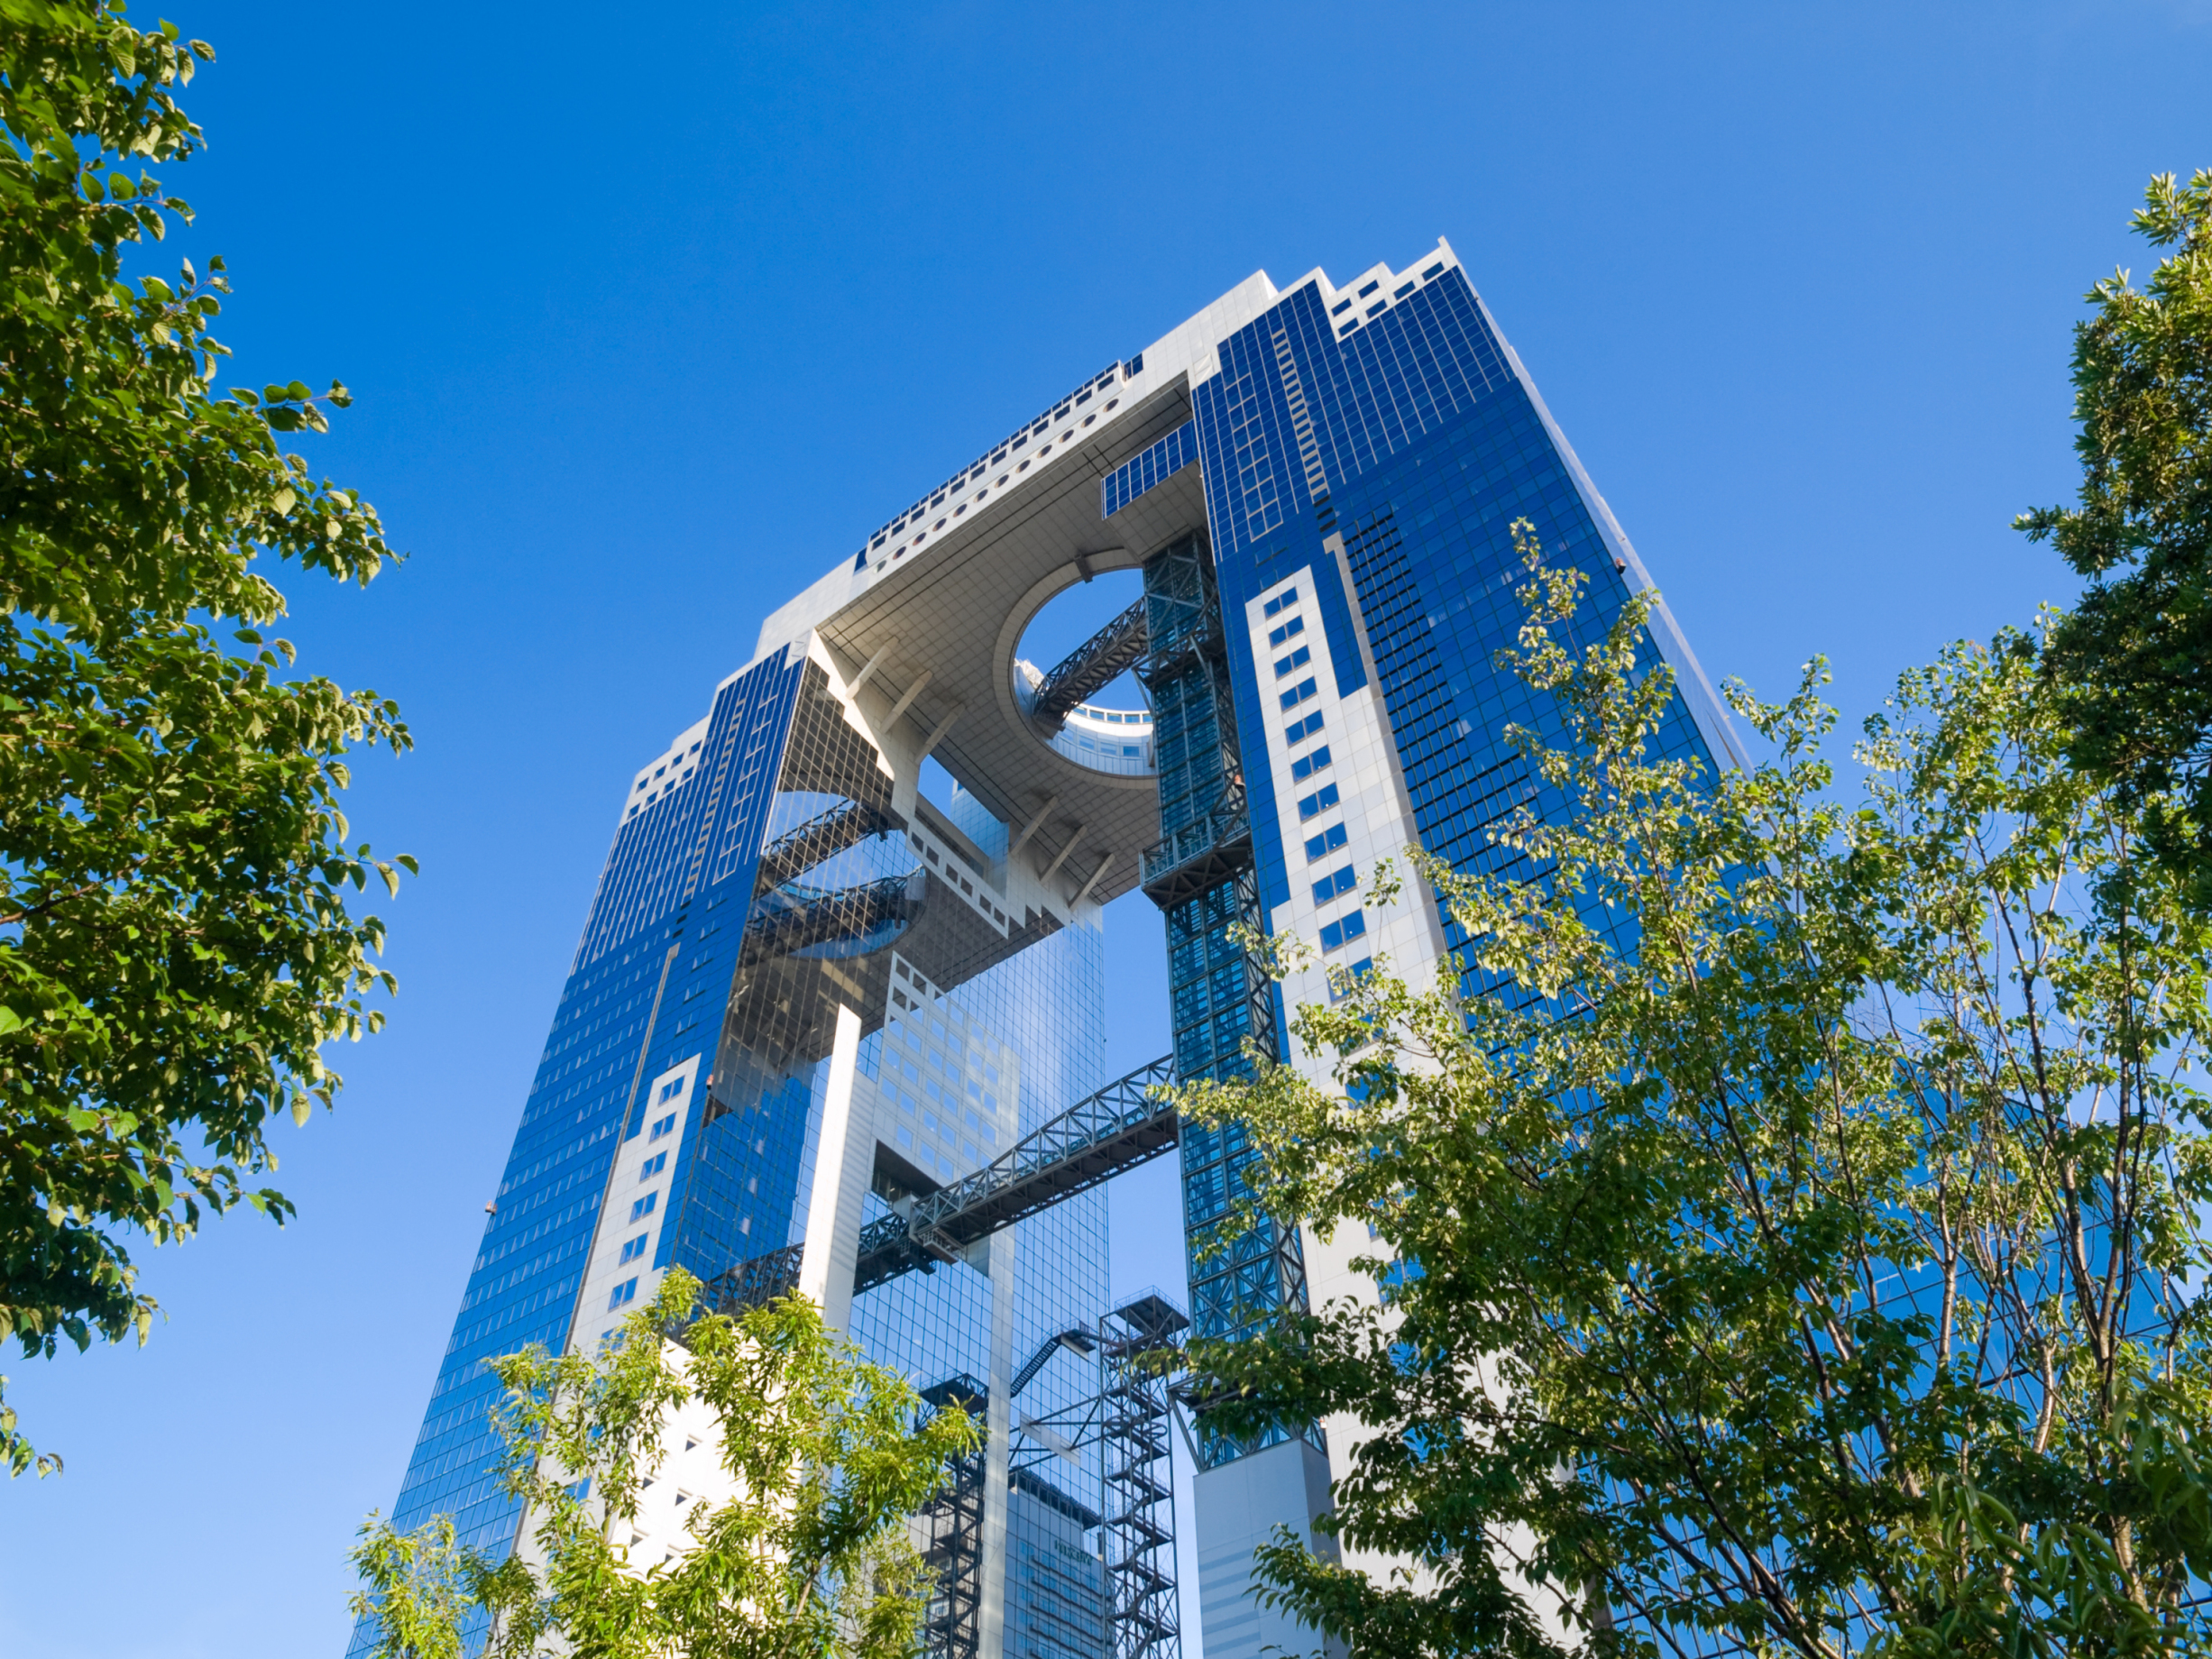 Umeda Sky Building | Osaka, Japan Attractions - Lonely Planet